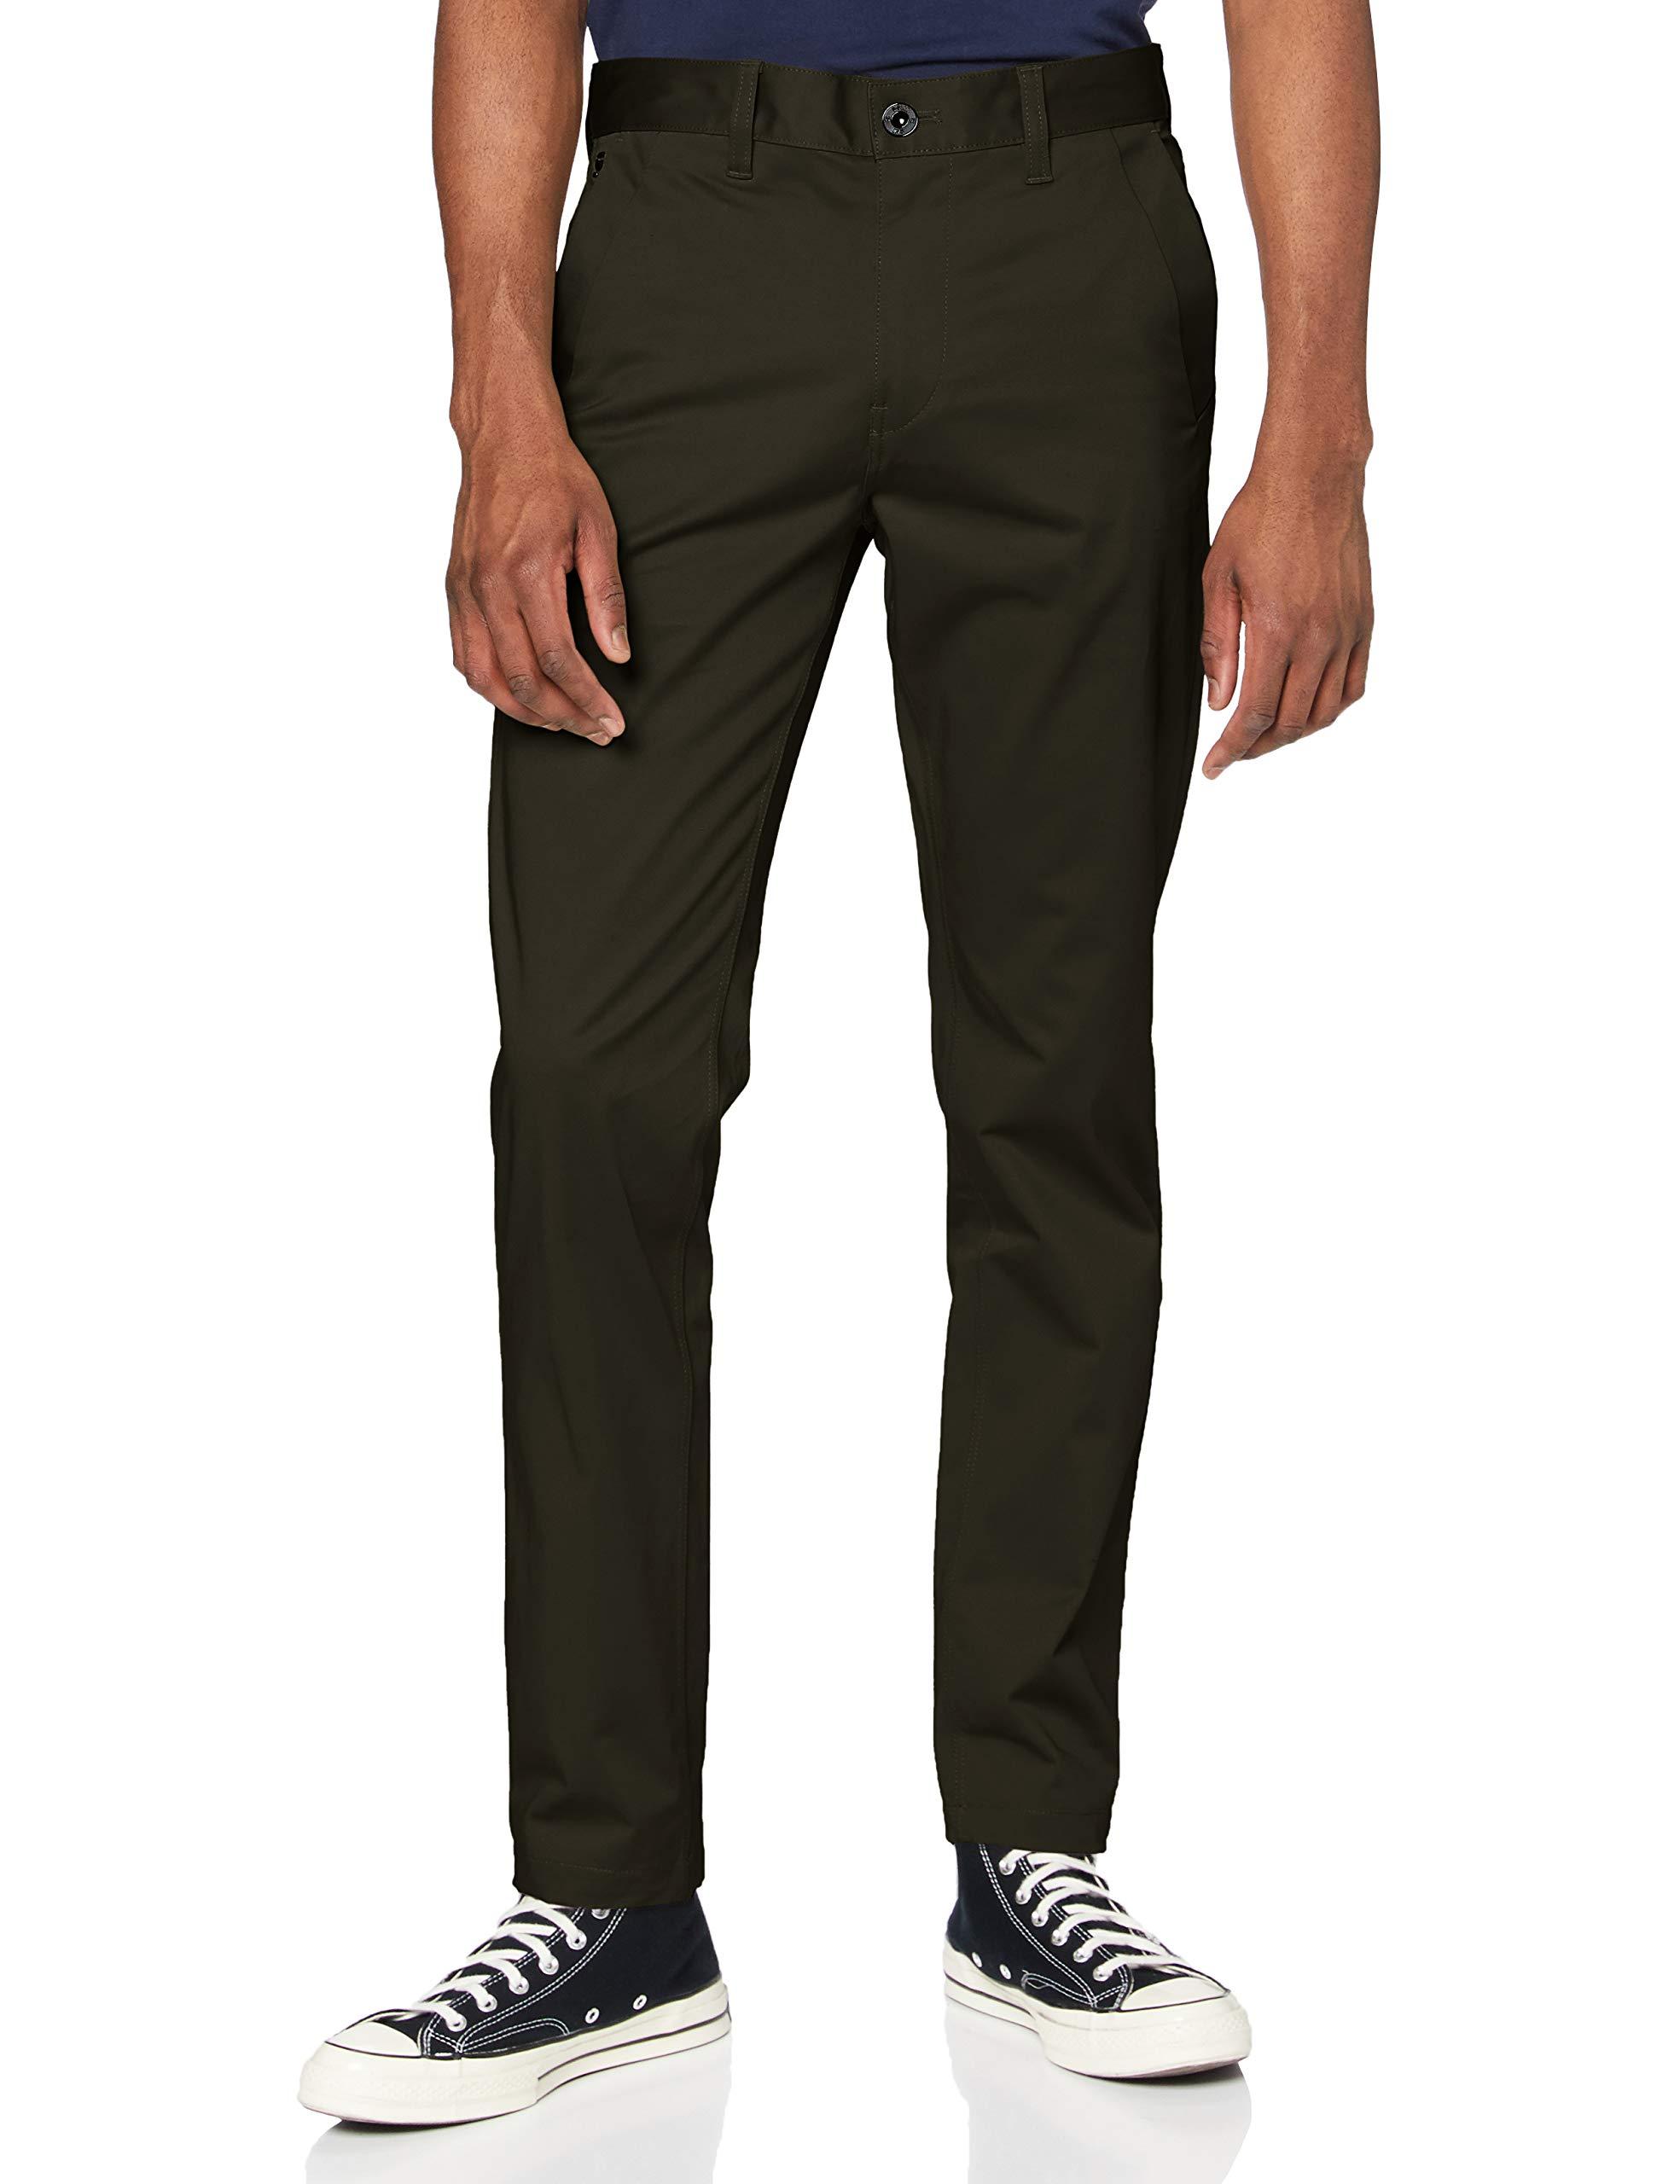 G-Star RAW Bronson Slim Chino Trousers for Men - Save 17% | Lyst